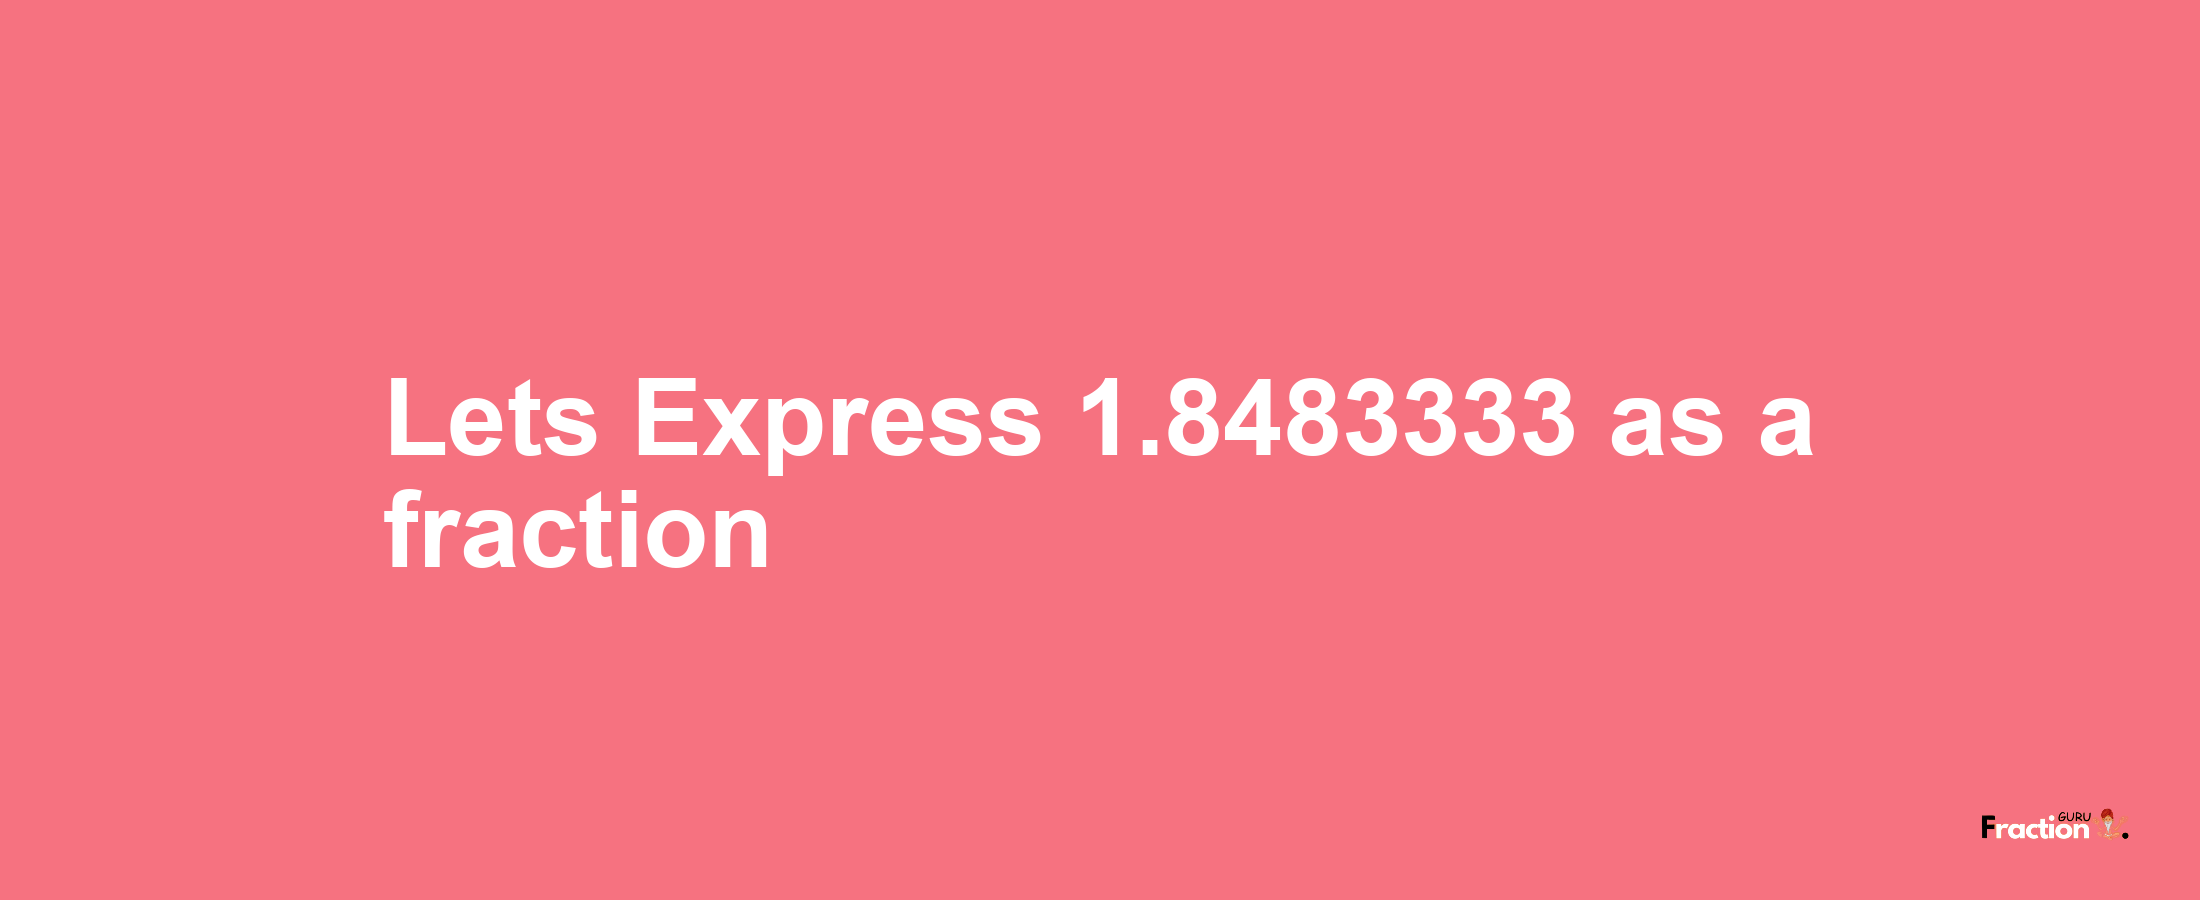 Lets Express 1.8483333 as afraction